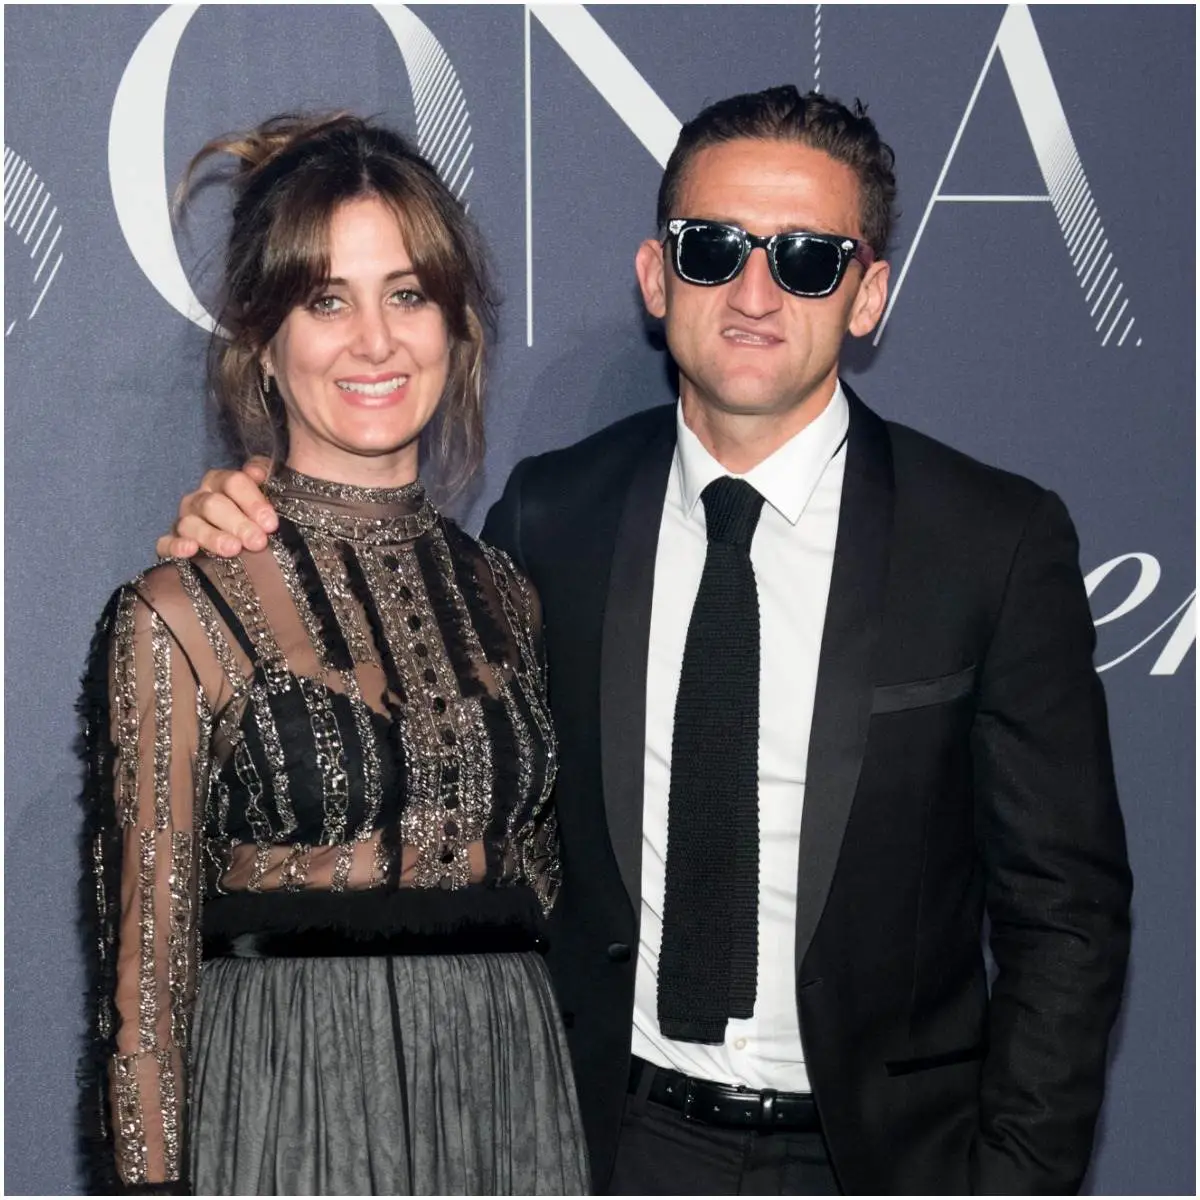 Casey Neistat and his wife Candice Pool